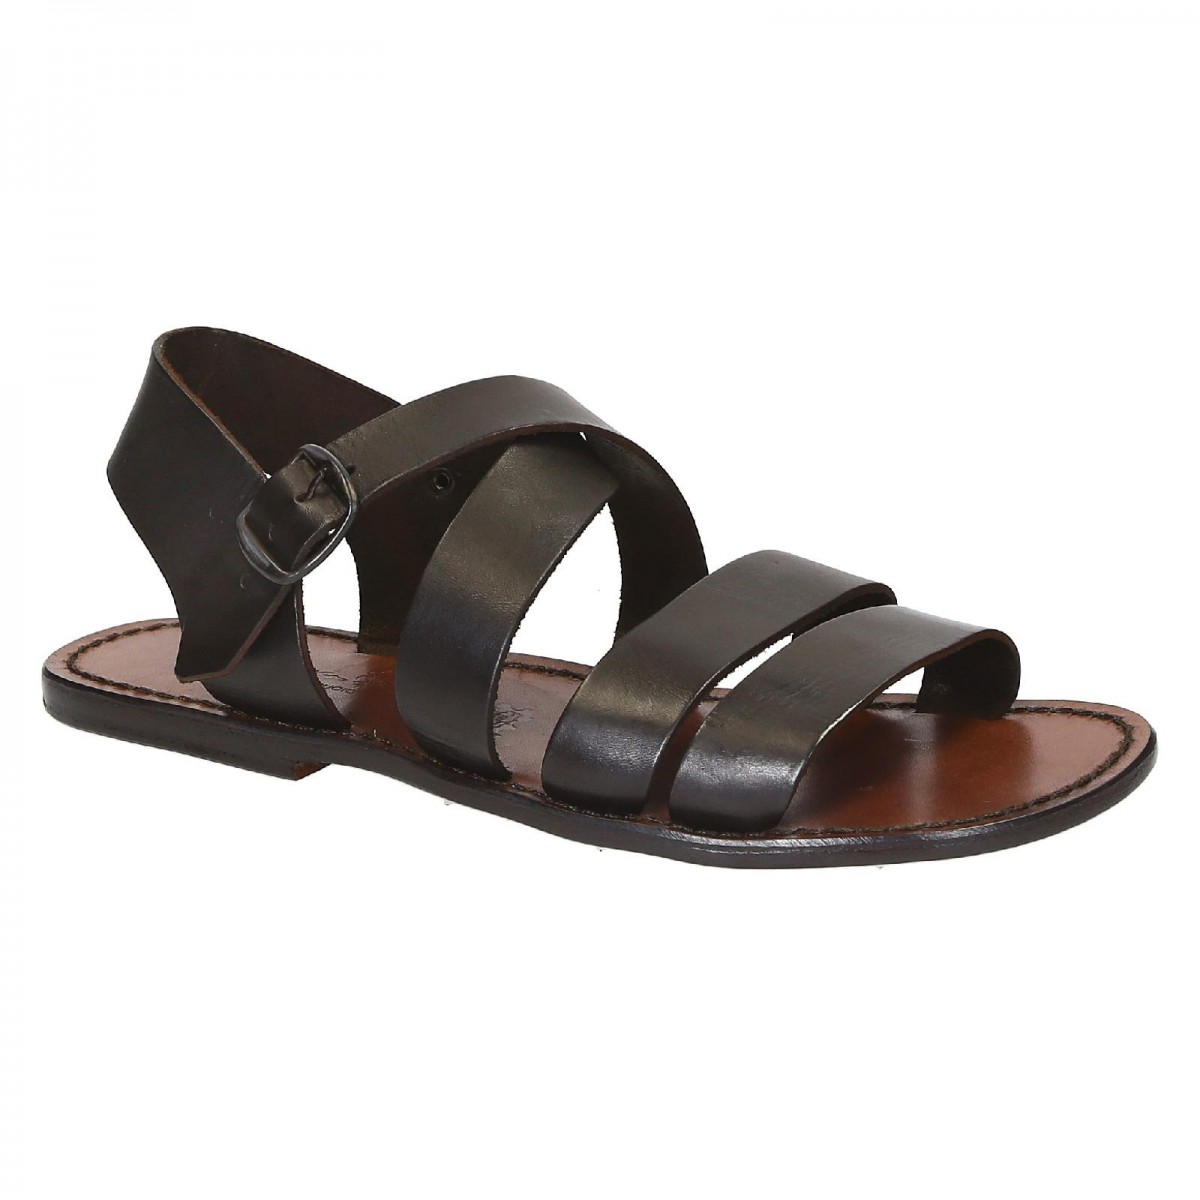 The Most Comfortable Travel Sandals for Men and Women!